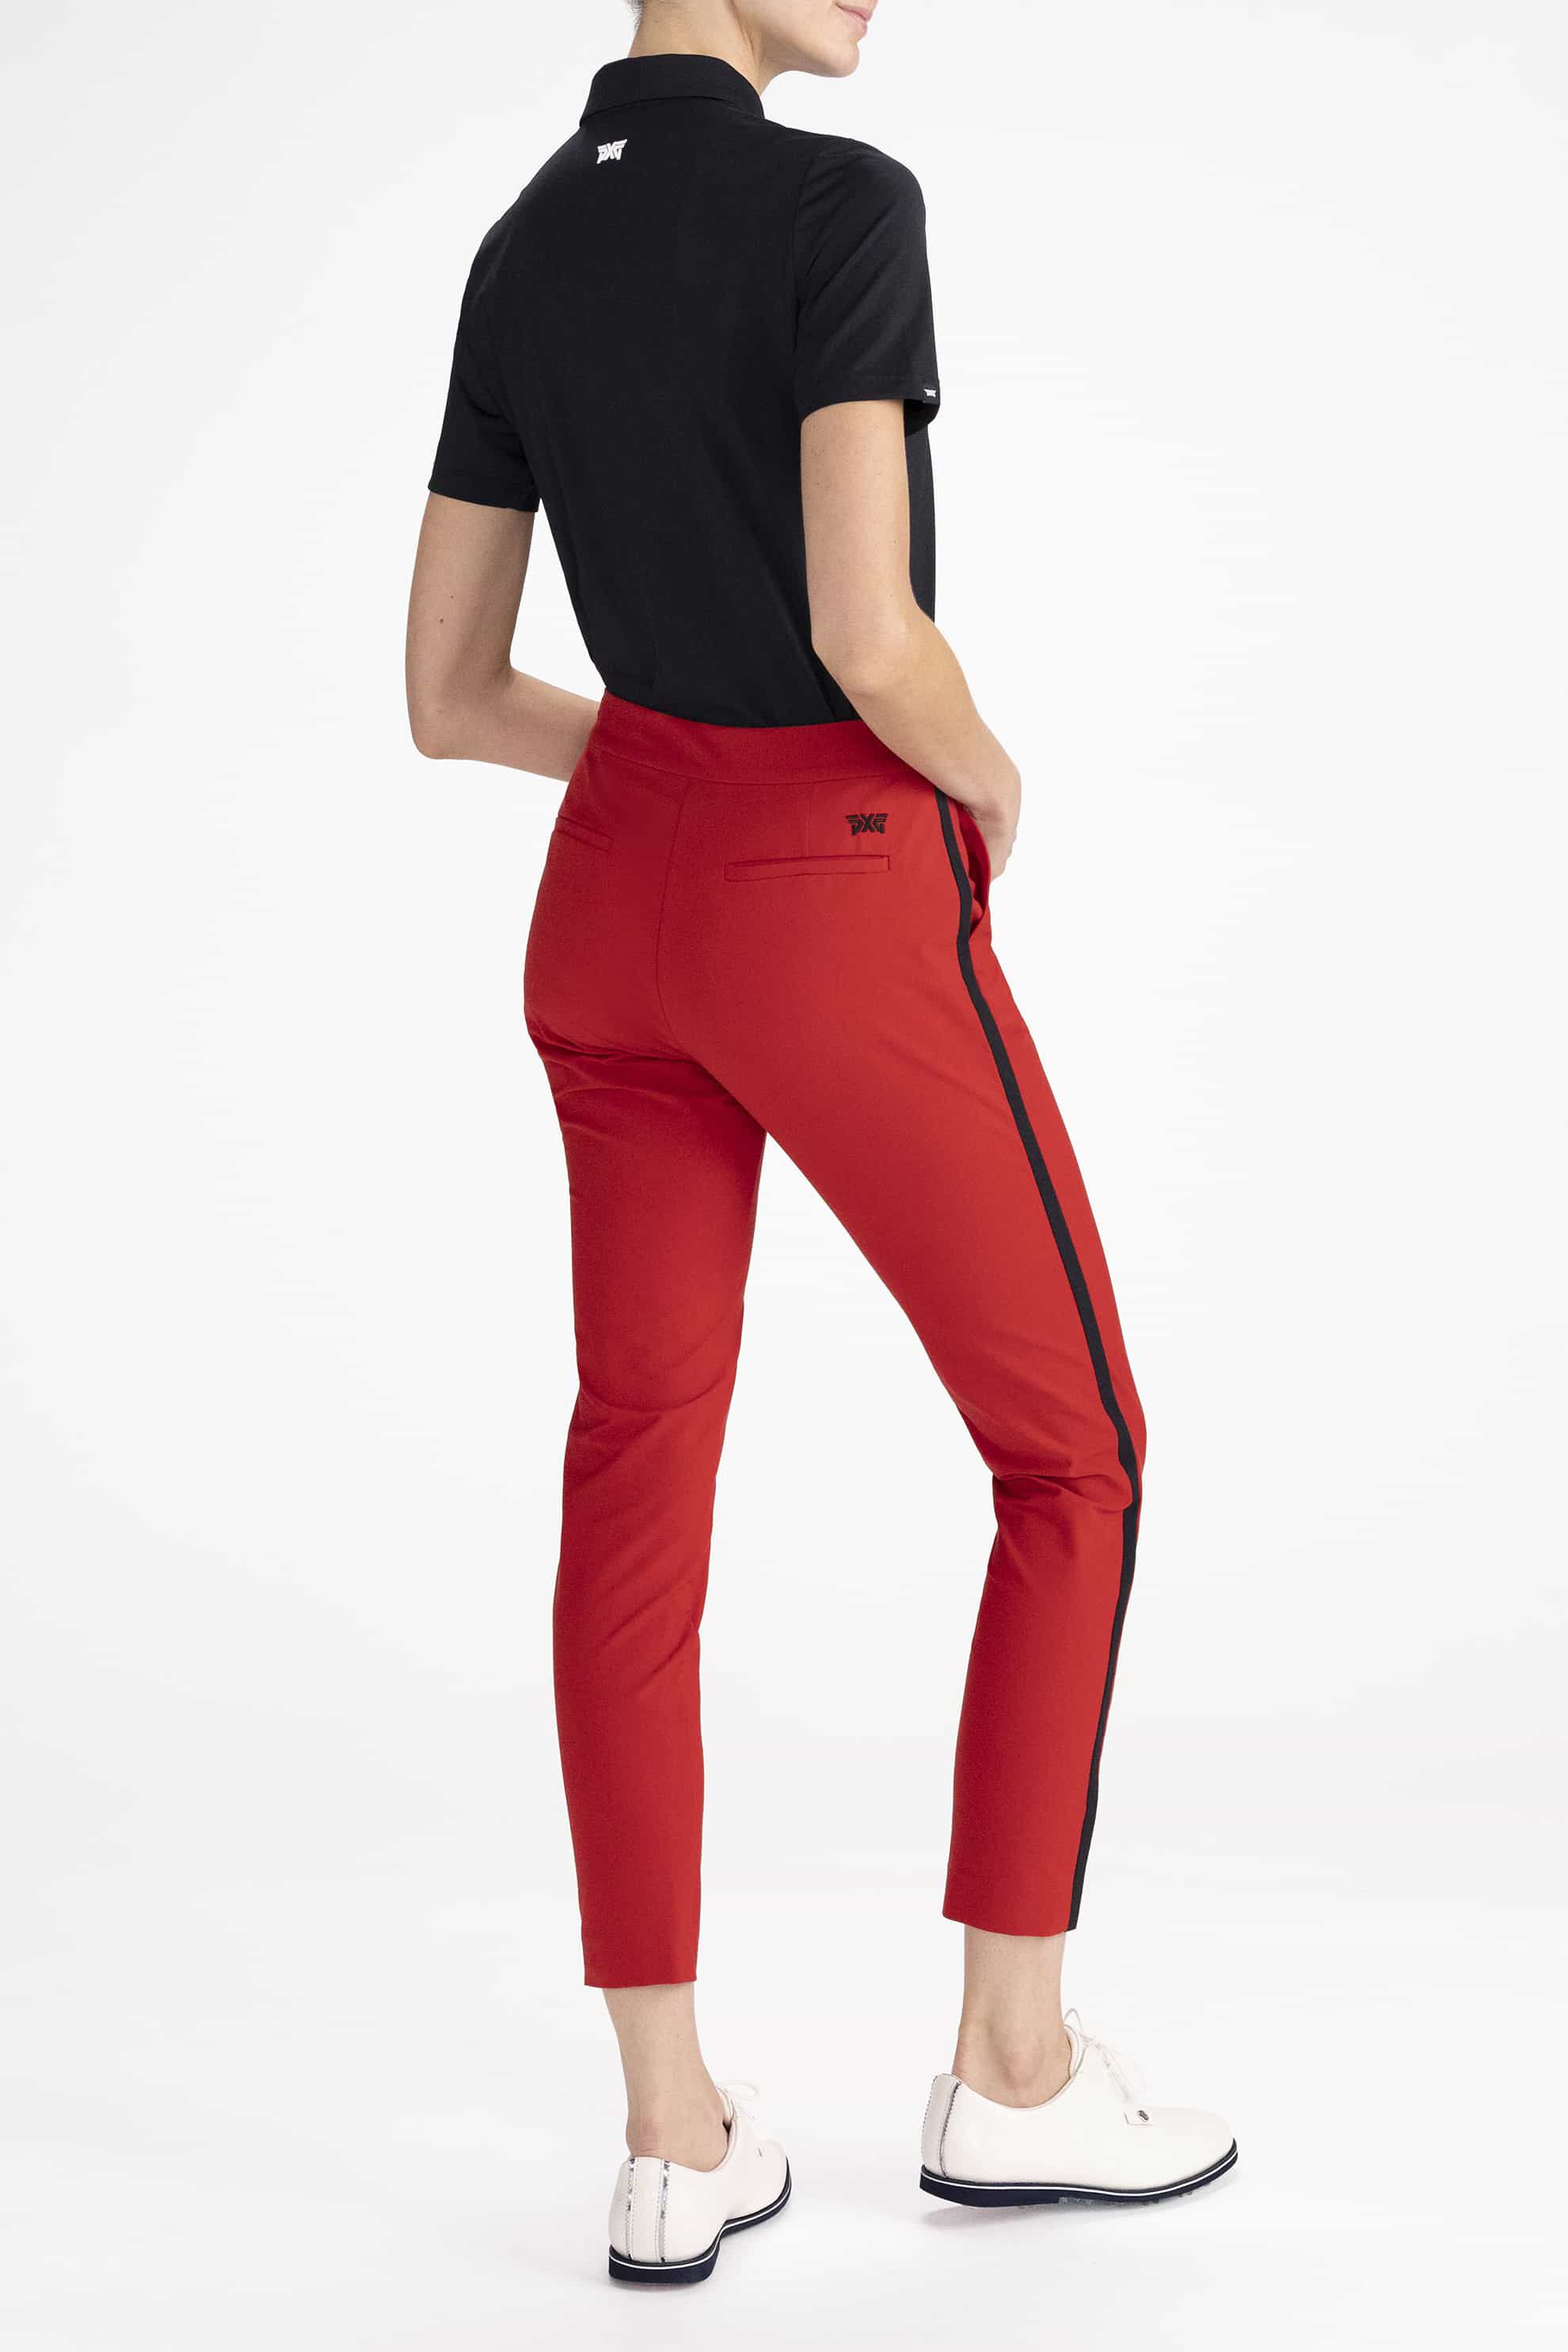 Contrast Piped Pants | Shop the Highest Quality Golf Apparel, Gear